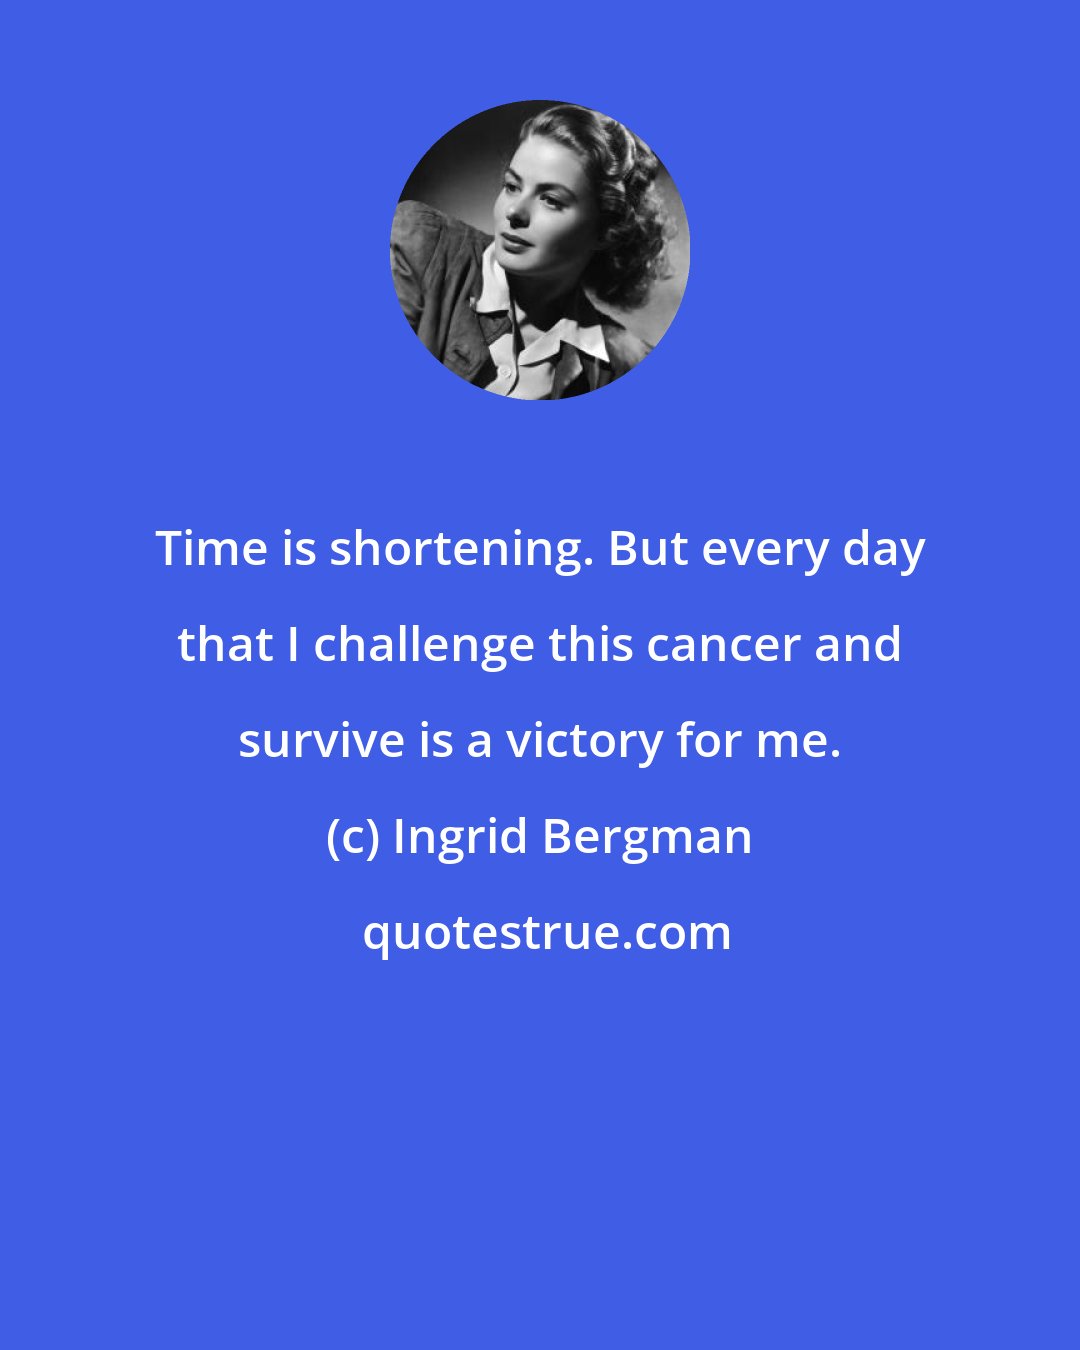 Ingrid Bergman: Time is shortening. But every day that I challenge this cancer and survive is a victory for me.